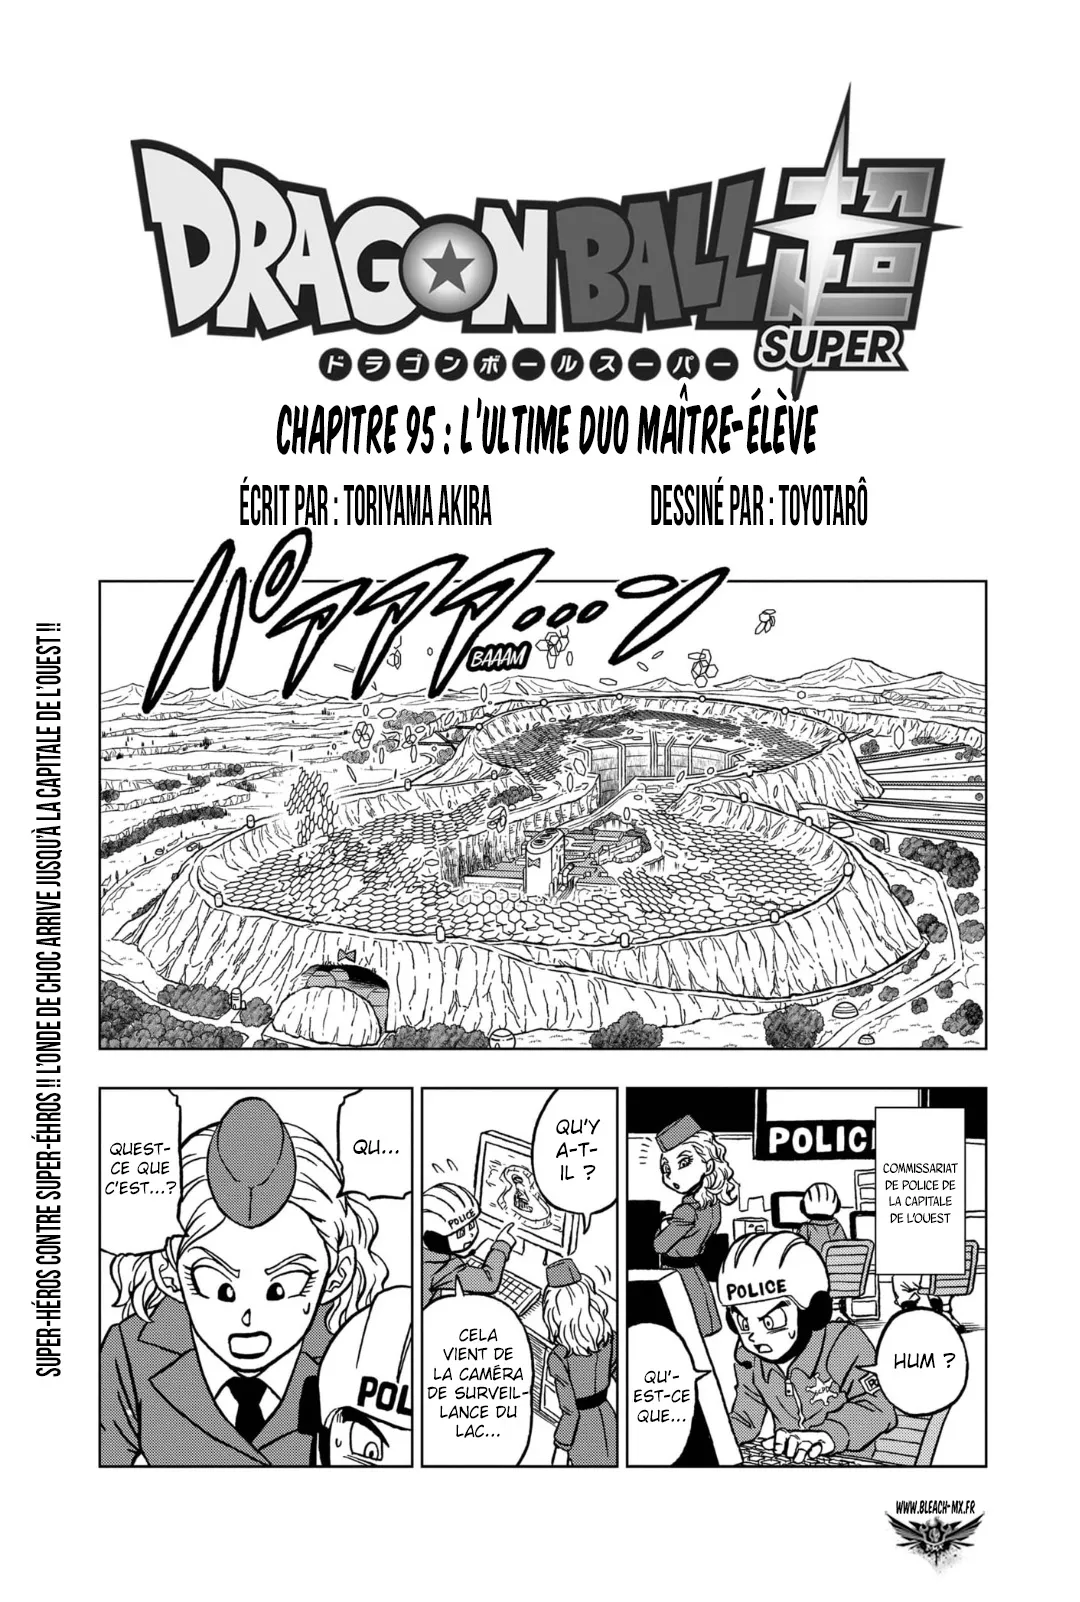 Dragon Ball Super: Chapter chapitre-95 - Page 1